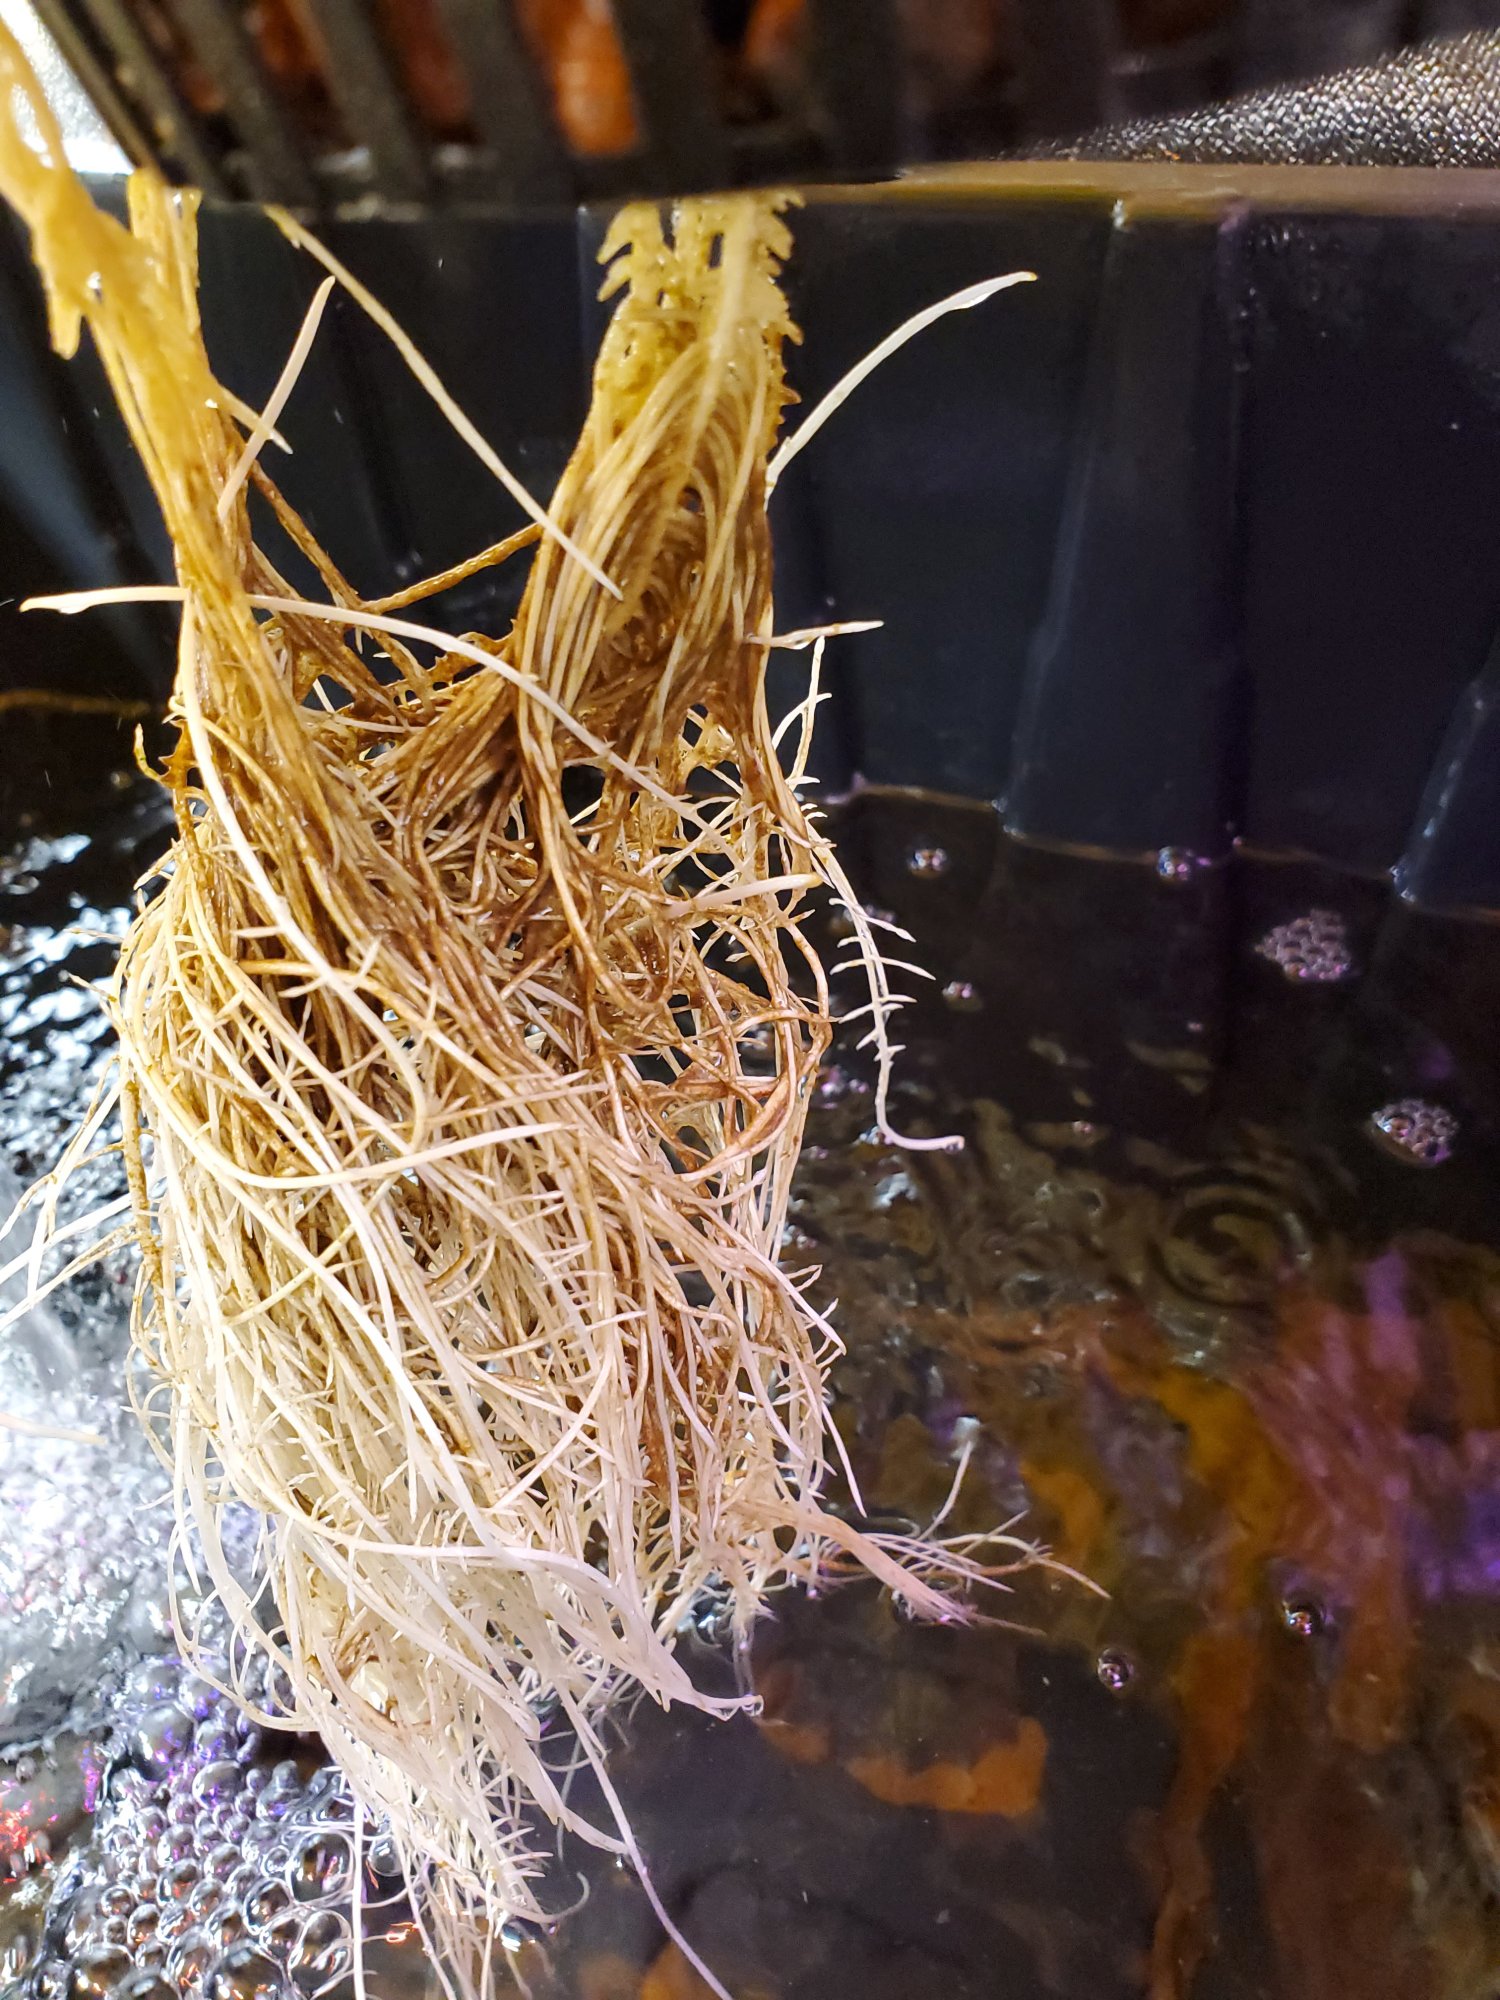 Dwc brown slime on roots at water level